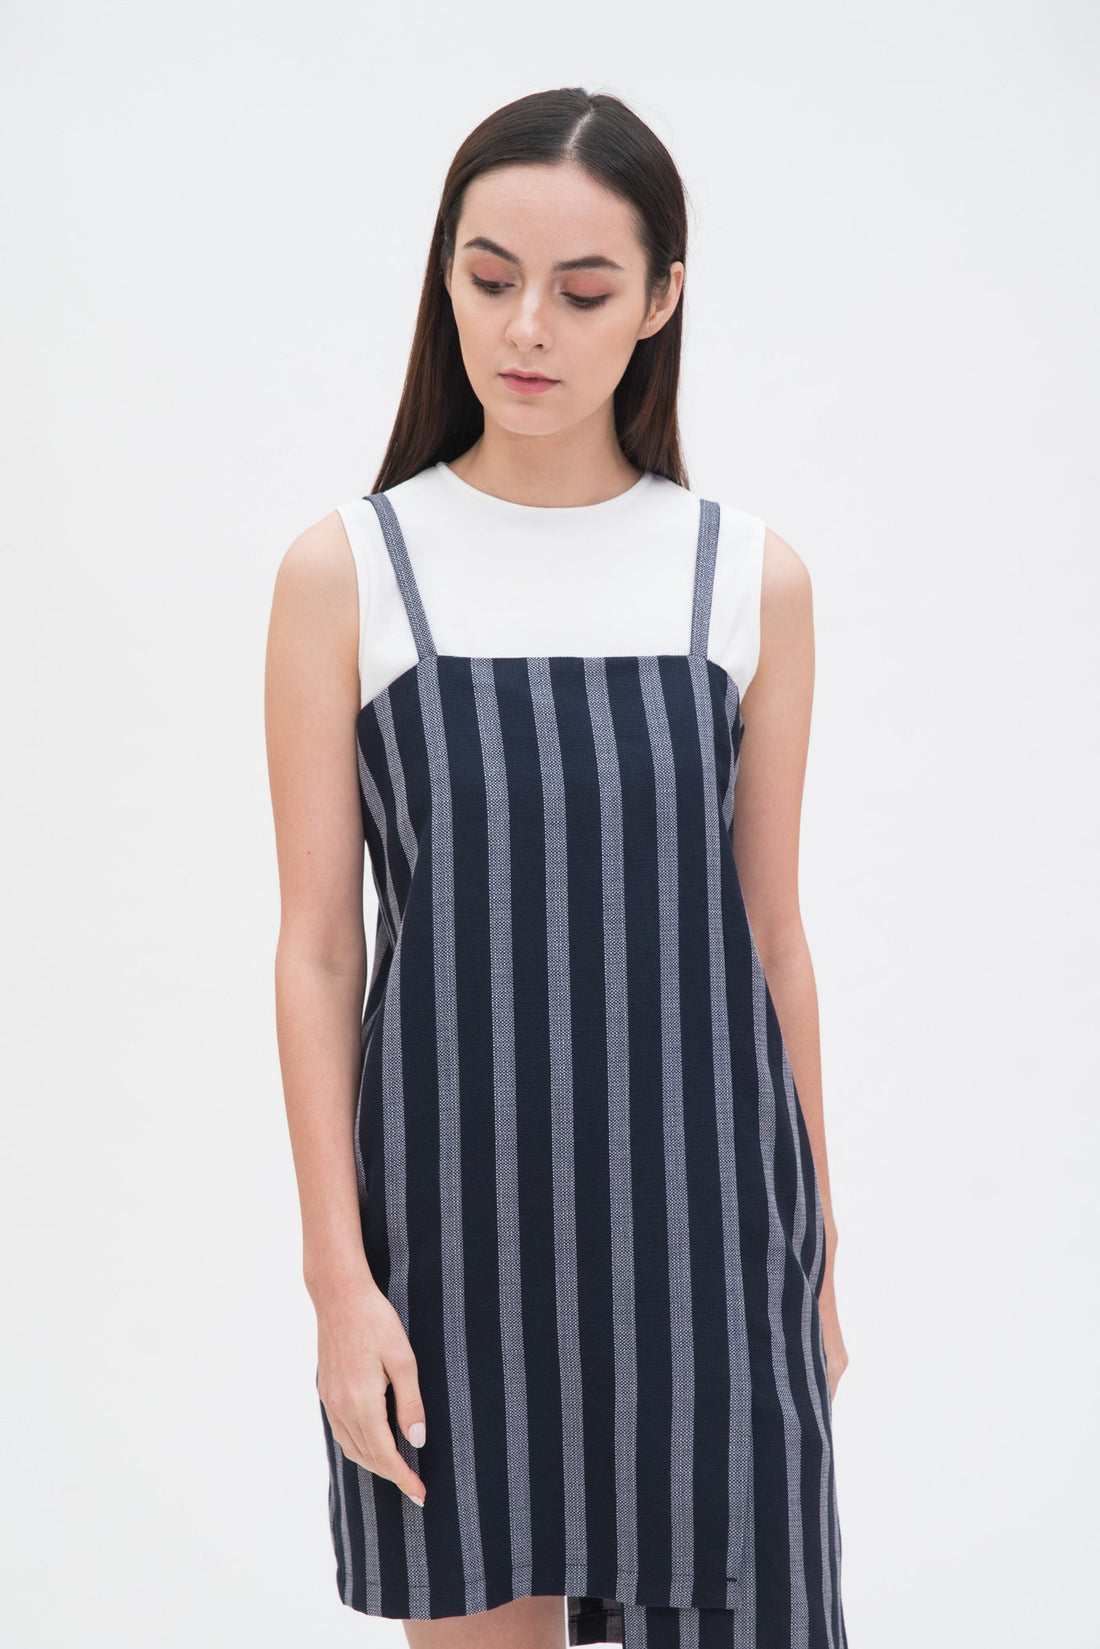 A woman with long brown hair is wearing a navy striped scrappy dress with a white top underneath.